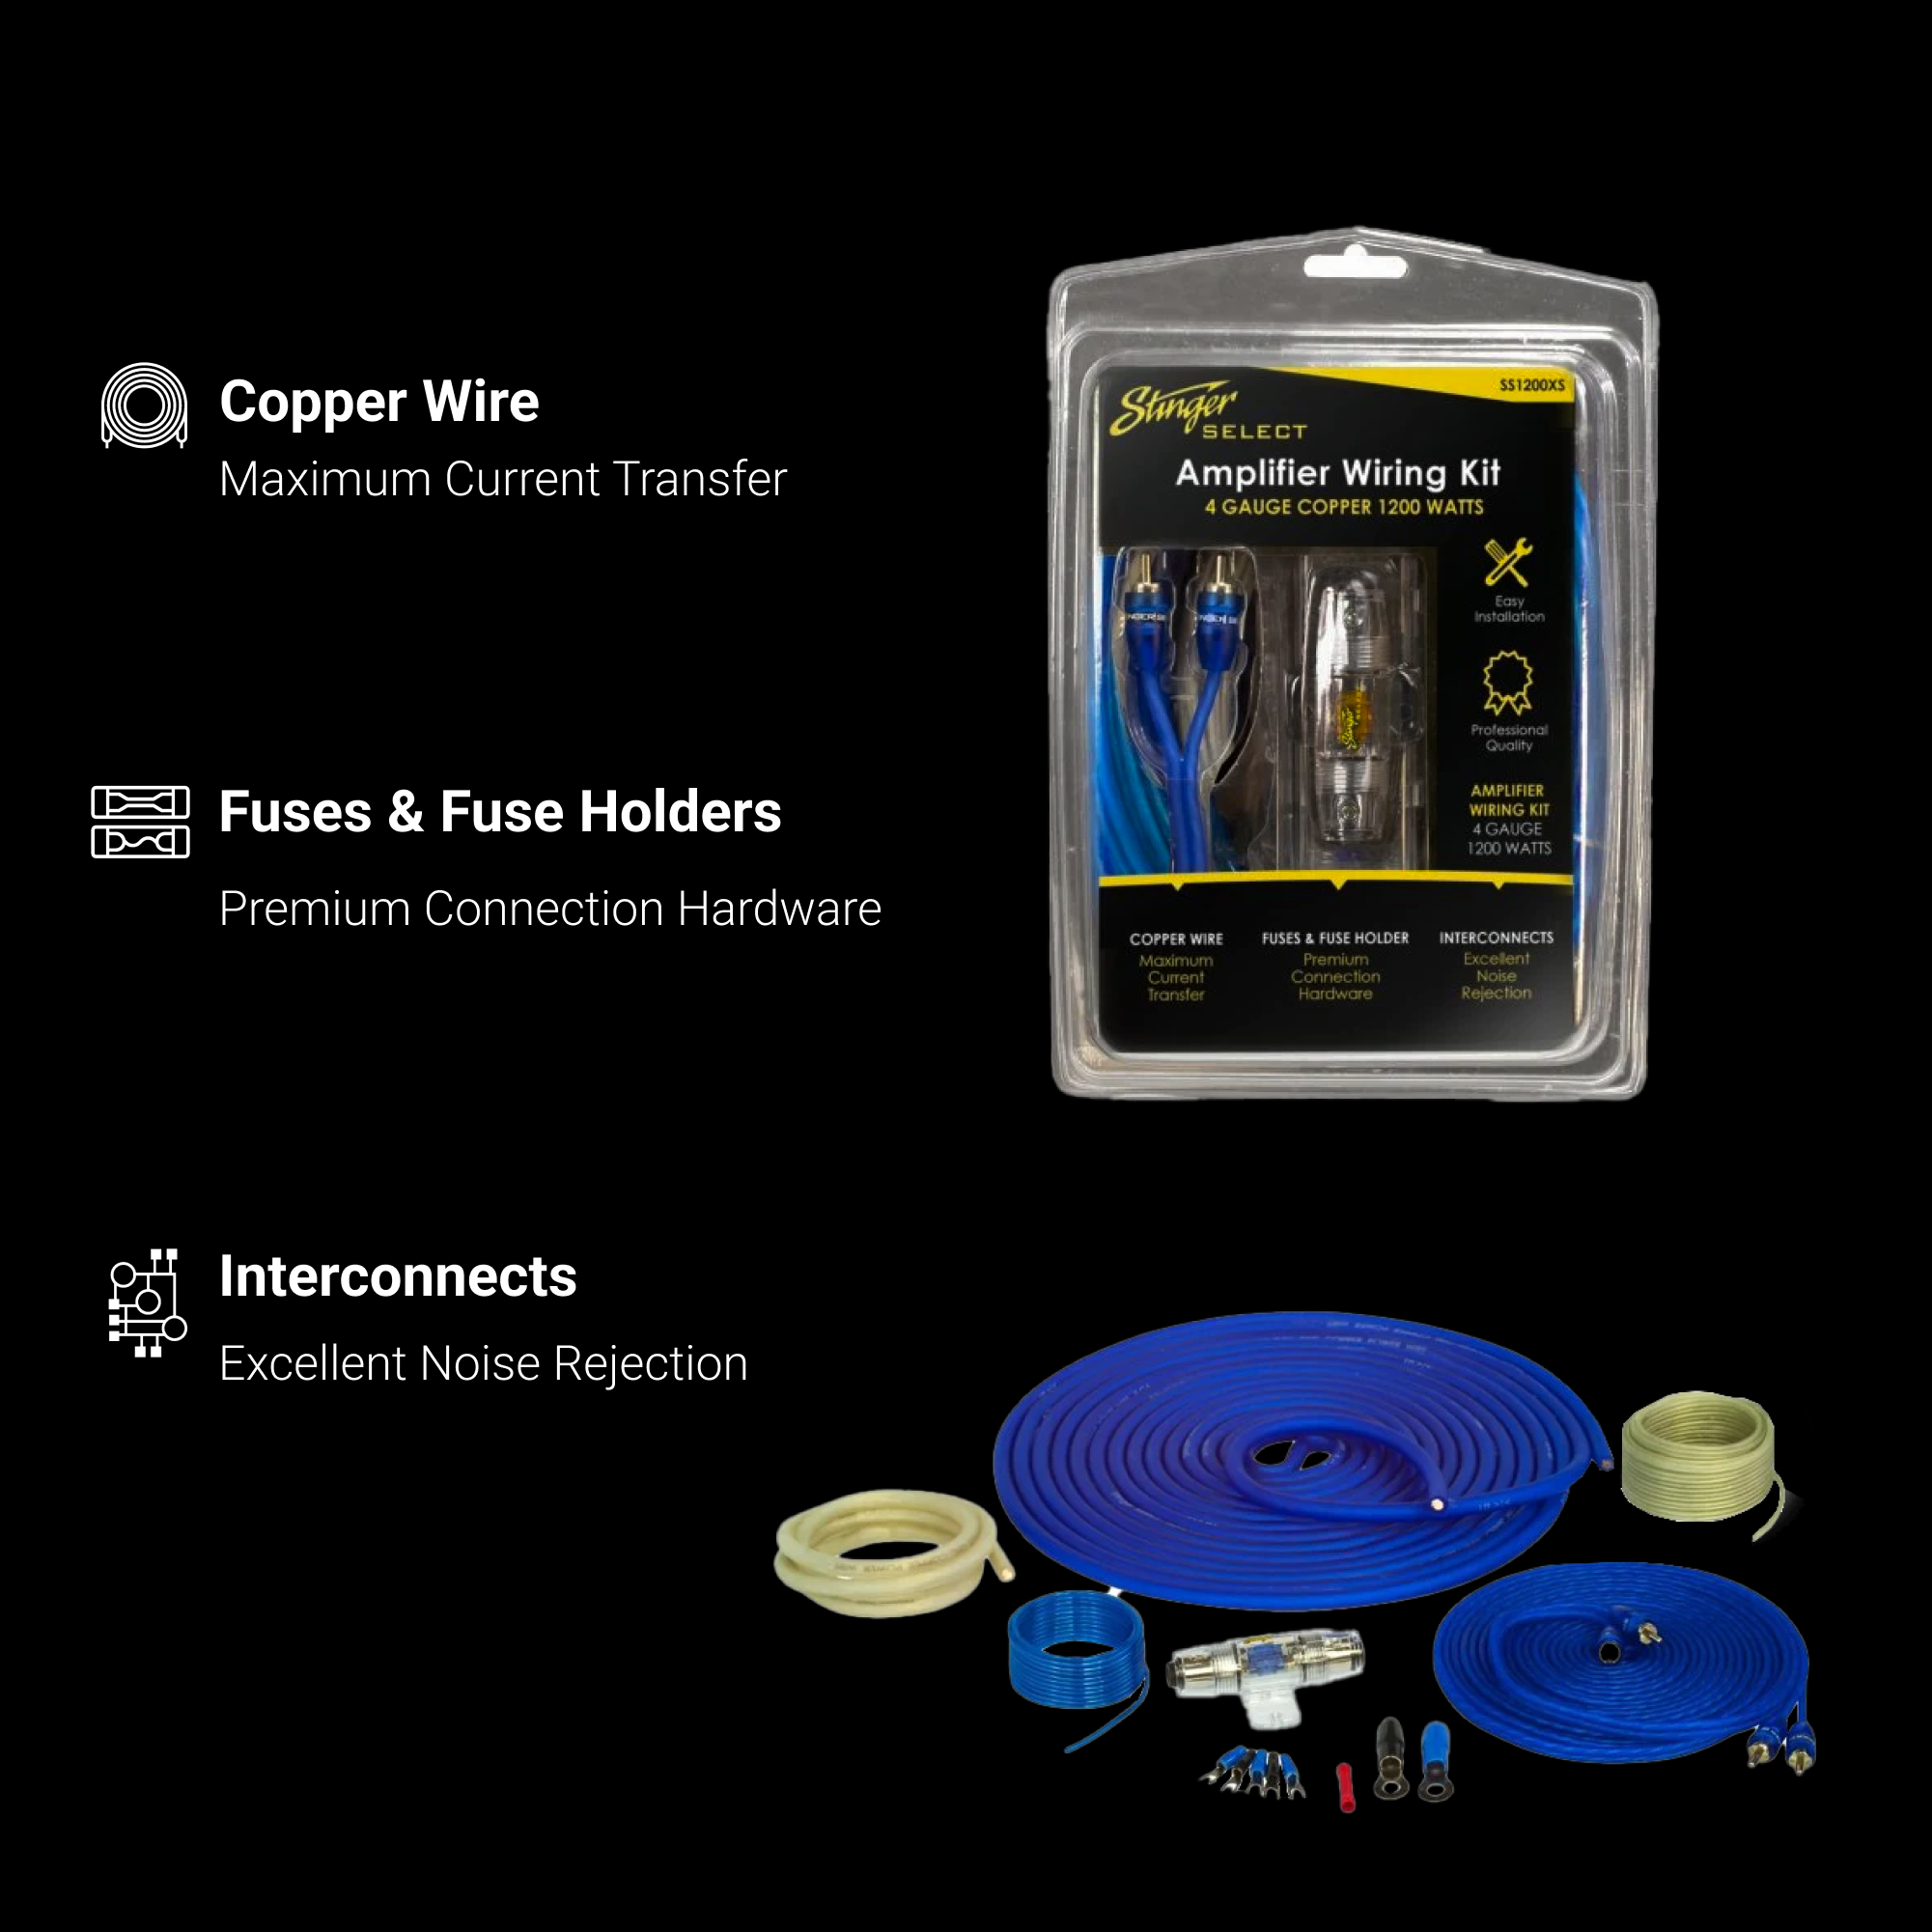 SS1200Xs Stinger Select Amplifier Wiring Kit "Copper Wire, Fuses and Fuse Holder, and Interconnects"